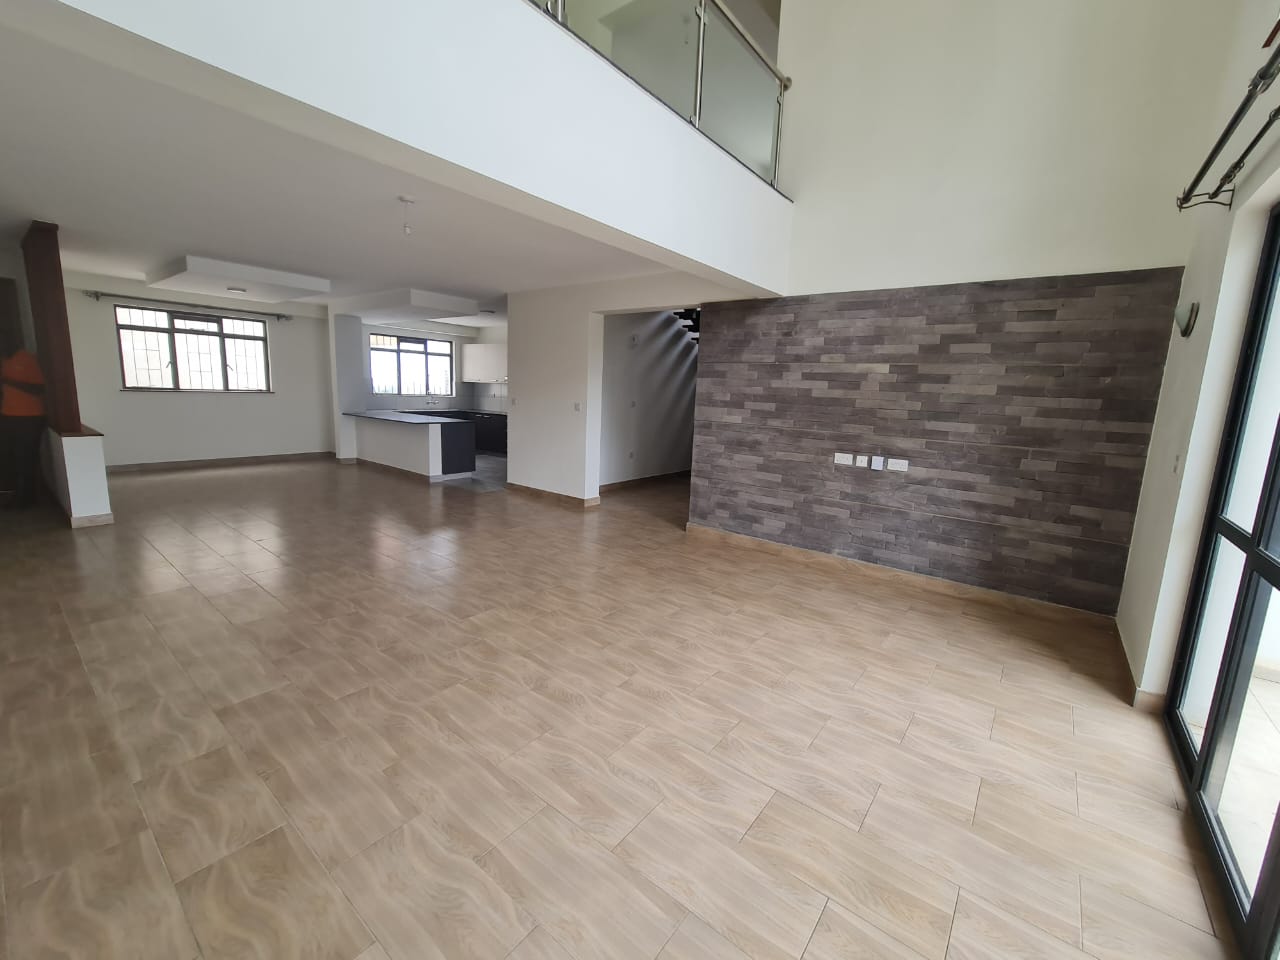 4 Bedroom New Penthouse for Rent in the heart of Westlands with great views, lift, borehole, power backup generator For Rent at Ksh160k (23)